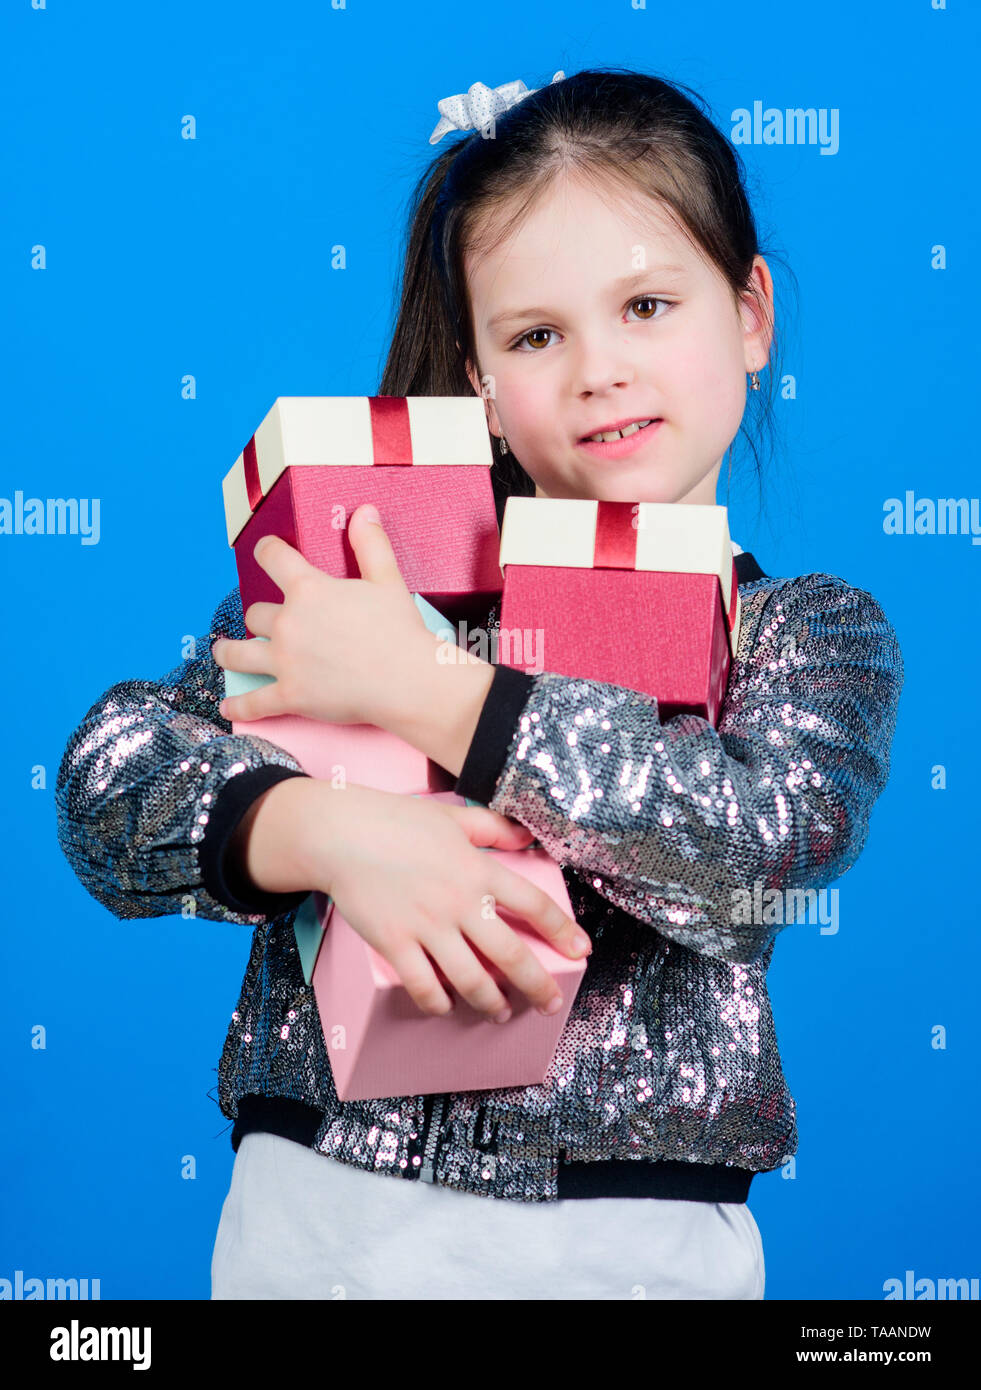 Black friday. Shopping day. Child carry lot gift boxes. Kids fashion. Surprise gift box. Birthday wish list. Special happens every day. Shop for what you want. Girl with gift boxes blue background. Stock Photo